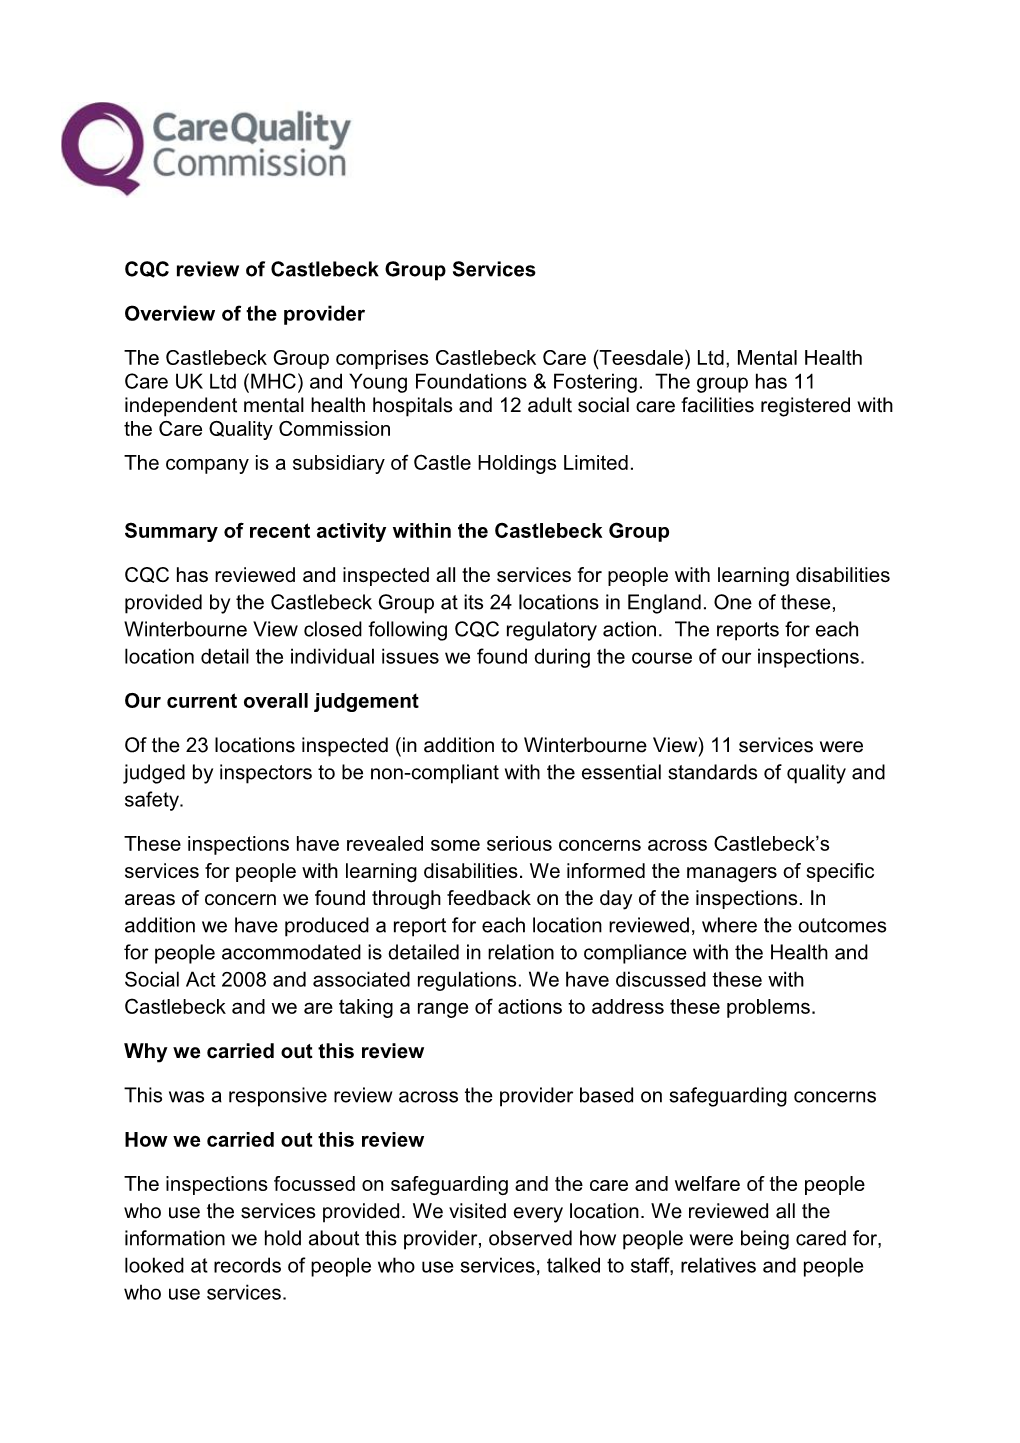 CQC Review of Castlebeck Group Services